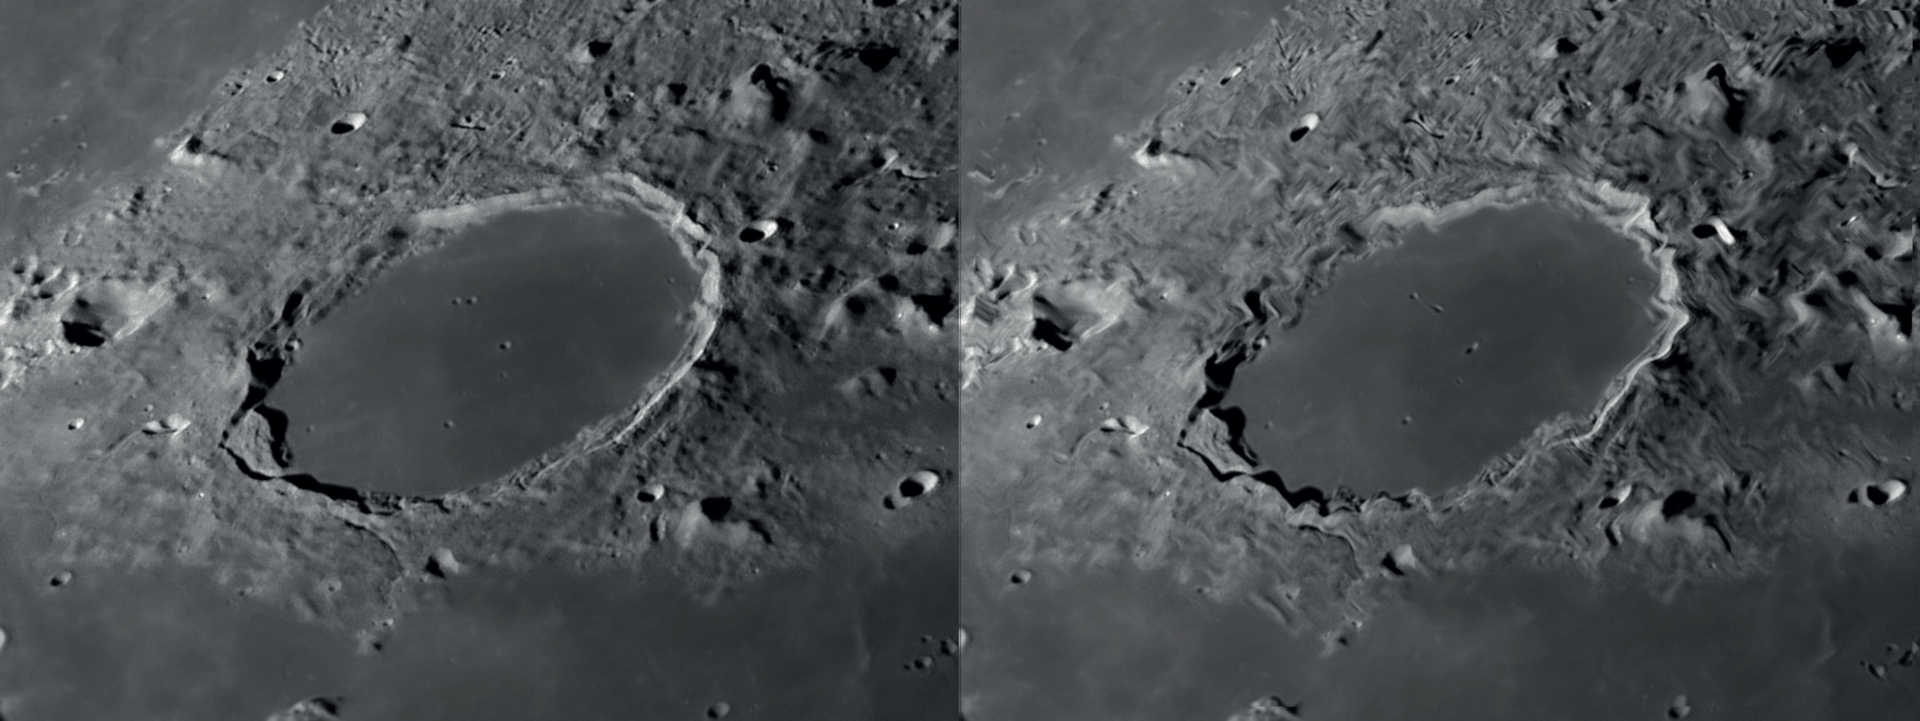 If the seeing is good, detail recognition is excellent when observing the Moon and planets (left). Slowly moving air will cause parts of the image to be distorted, while other areas remain sharp (right). NASA/GSFC/Arizona State University/L. Spix